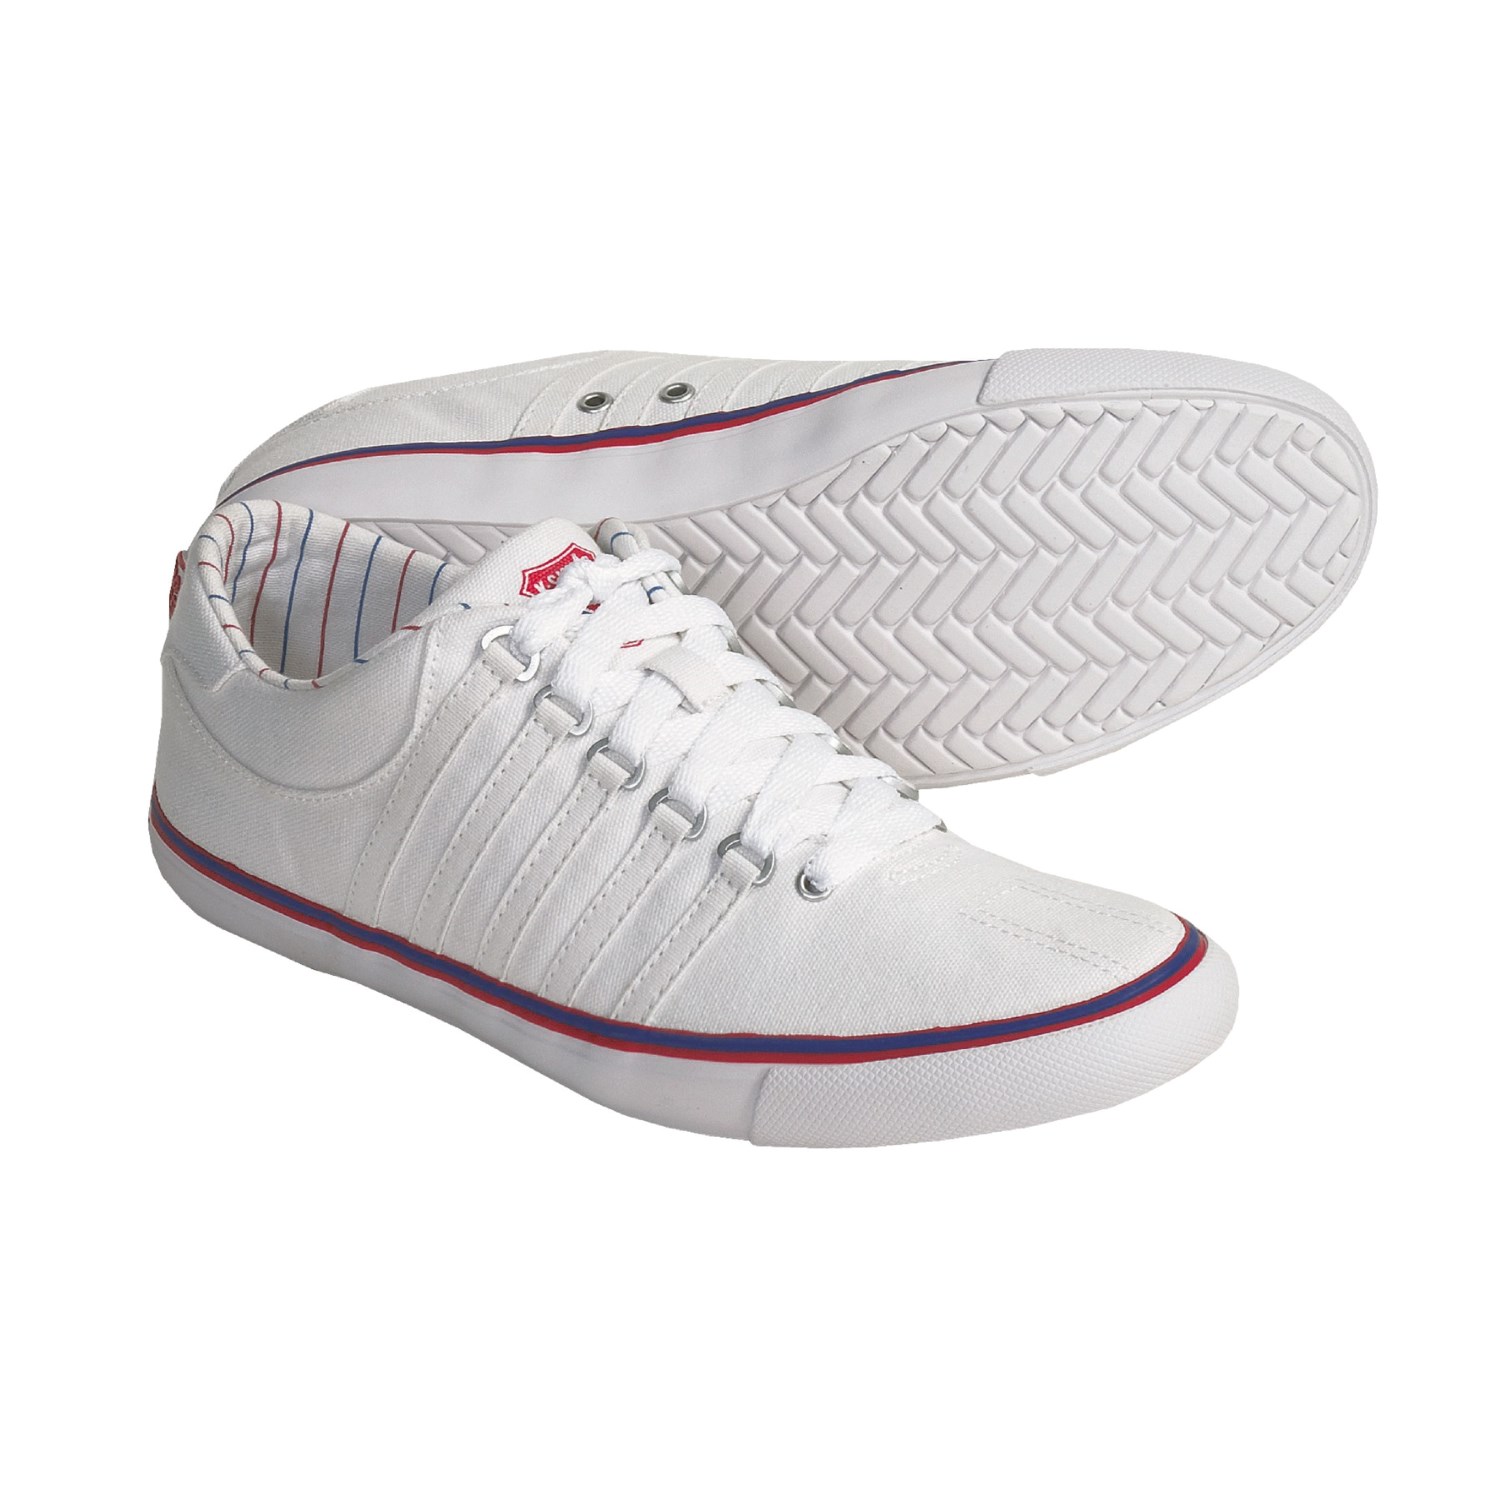 K-Swiss Surf and Court Shoes (For Women) 3481U - Save 31%